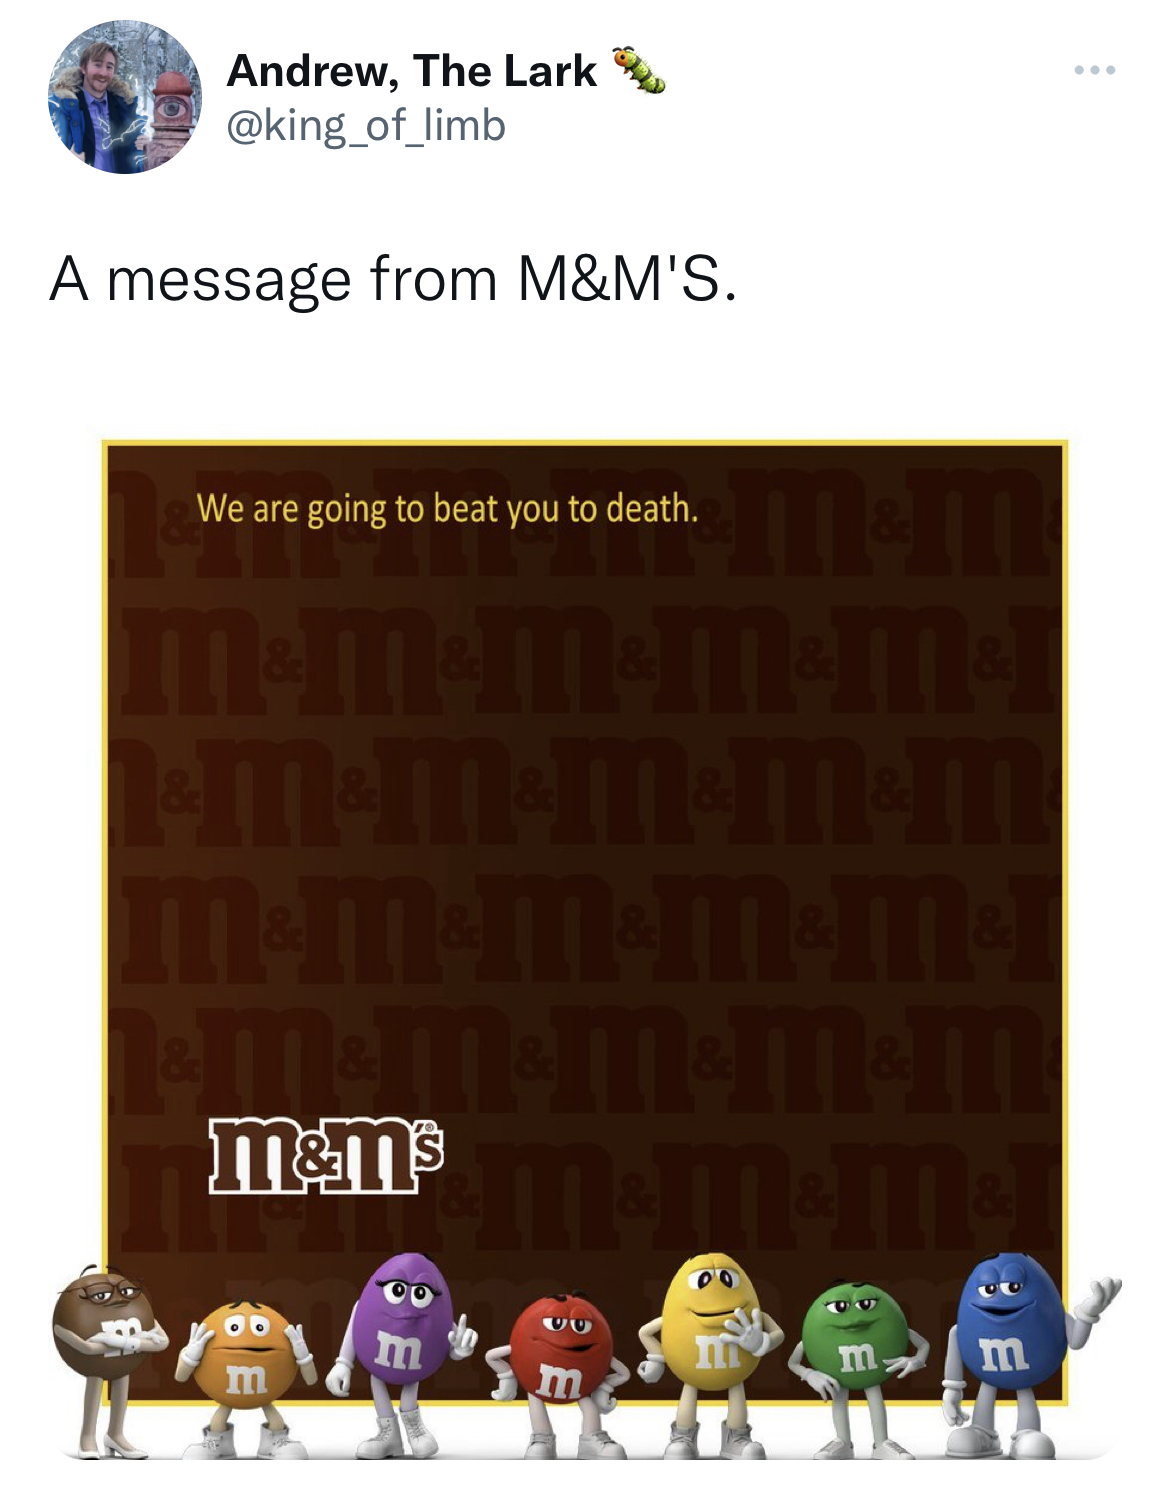 M&M's message spoofs - Mascot - Andrew, The Lark A message from M&M'S. We are going to beat you to death. h. mem MMmMm1 ImMMMm M&MMM&M Mmm&M M m&m's 60 m m